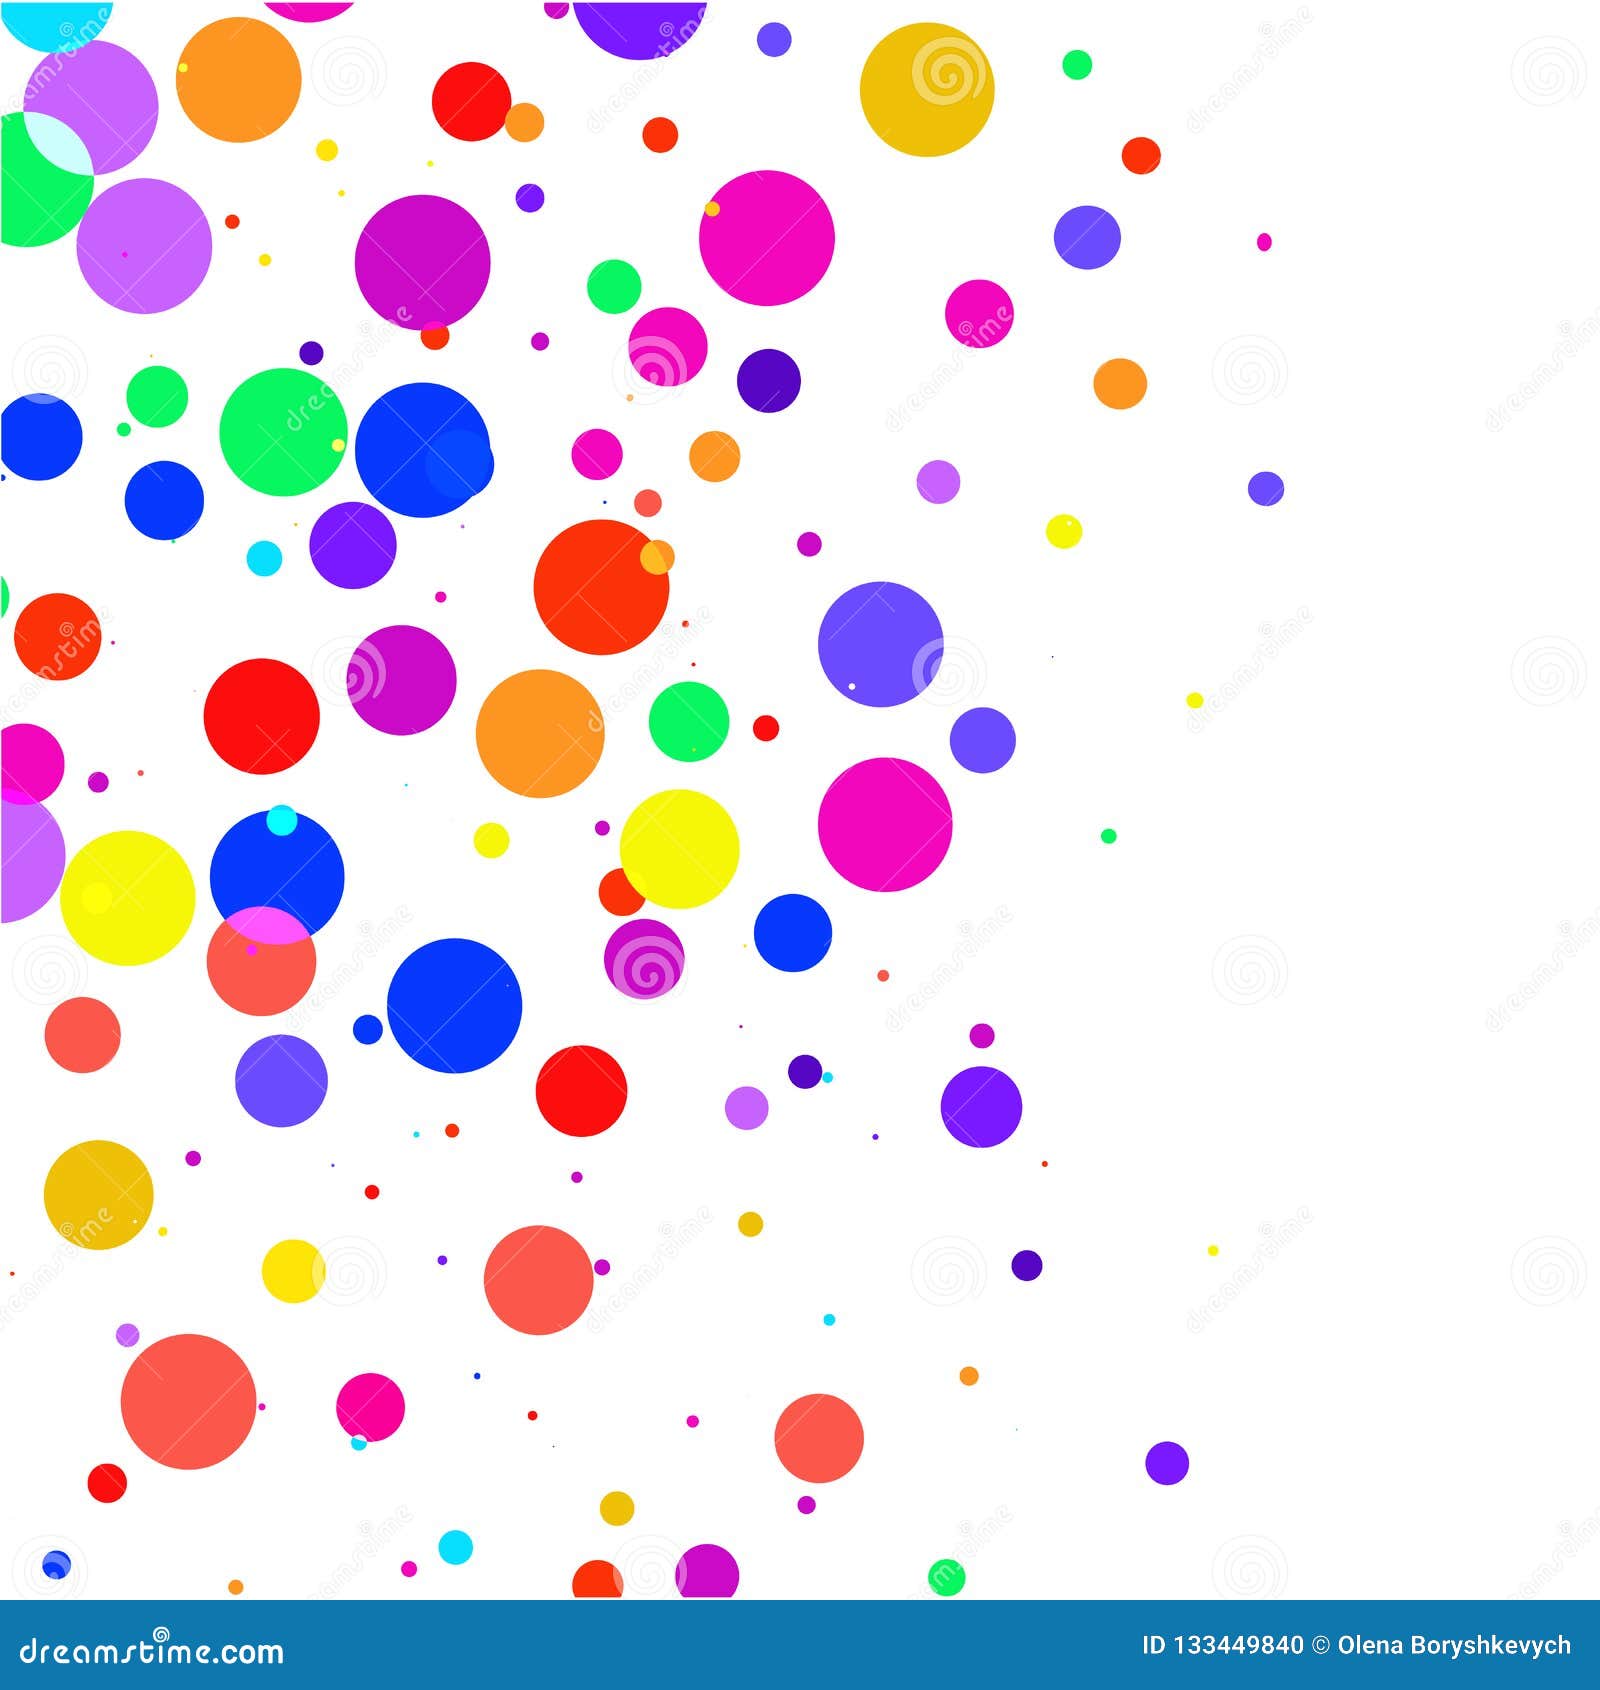 Colorful Dots Images - Free Download on Freepik